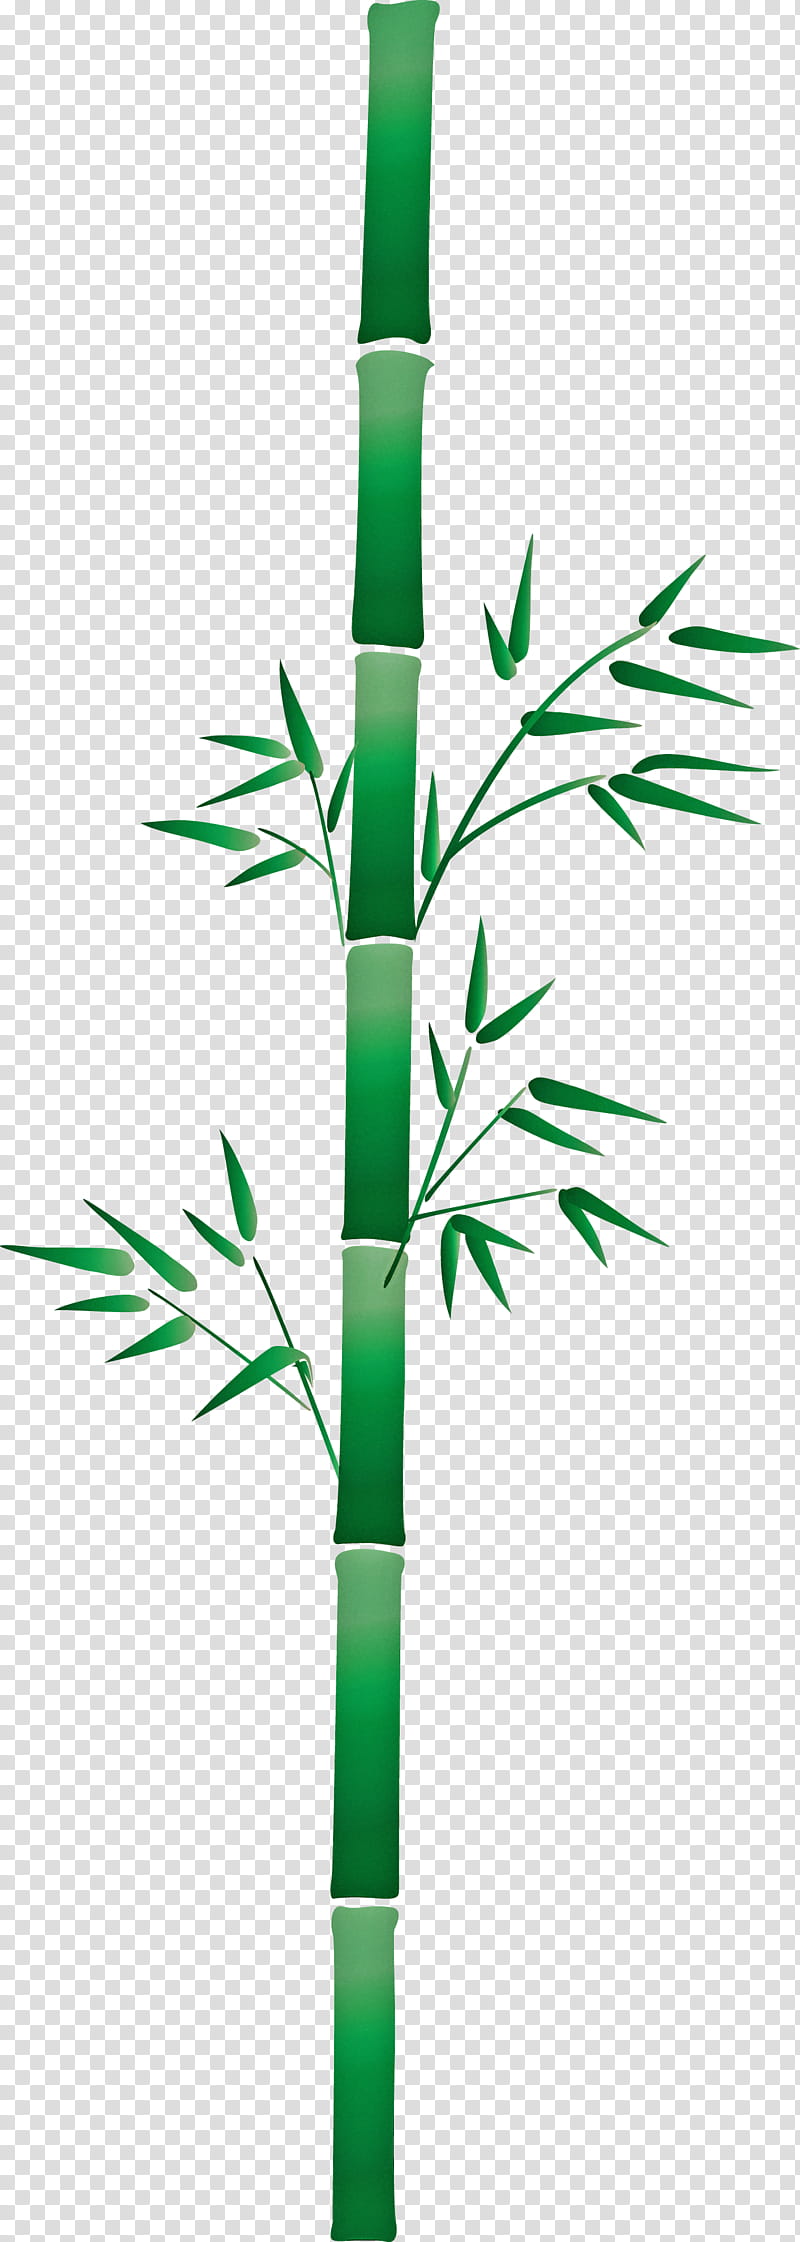 bamboo leaf, Plant, Plant Stem, Grass, Grass Family, Flower, Branch, Elymus Repens transparent background PNG clipart